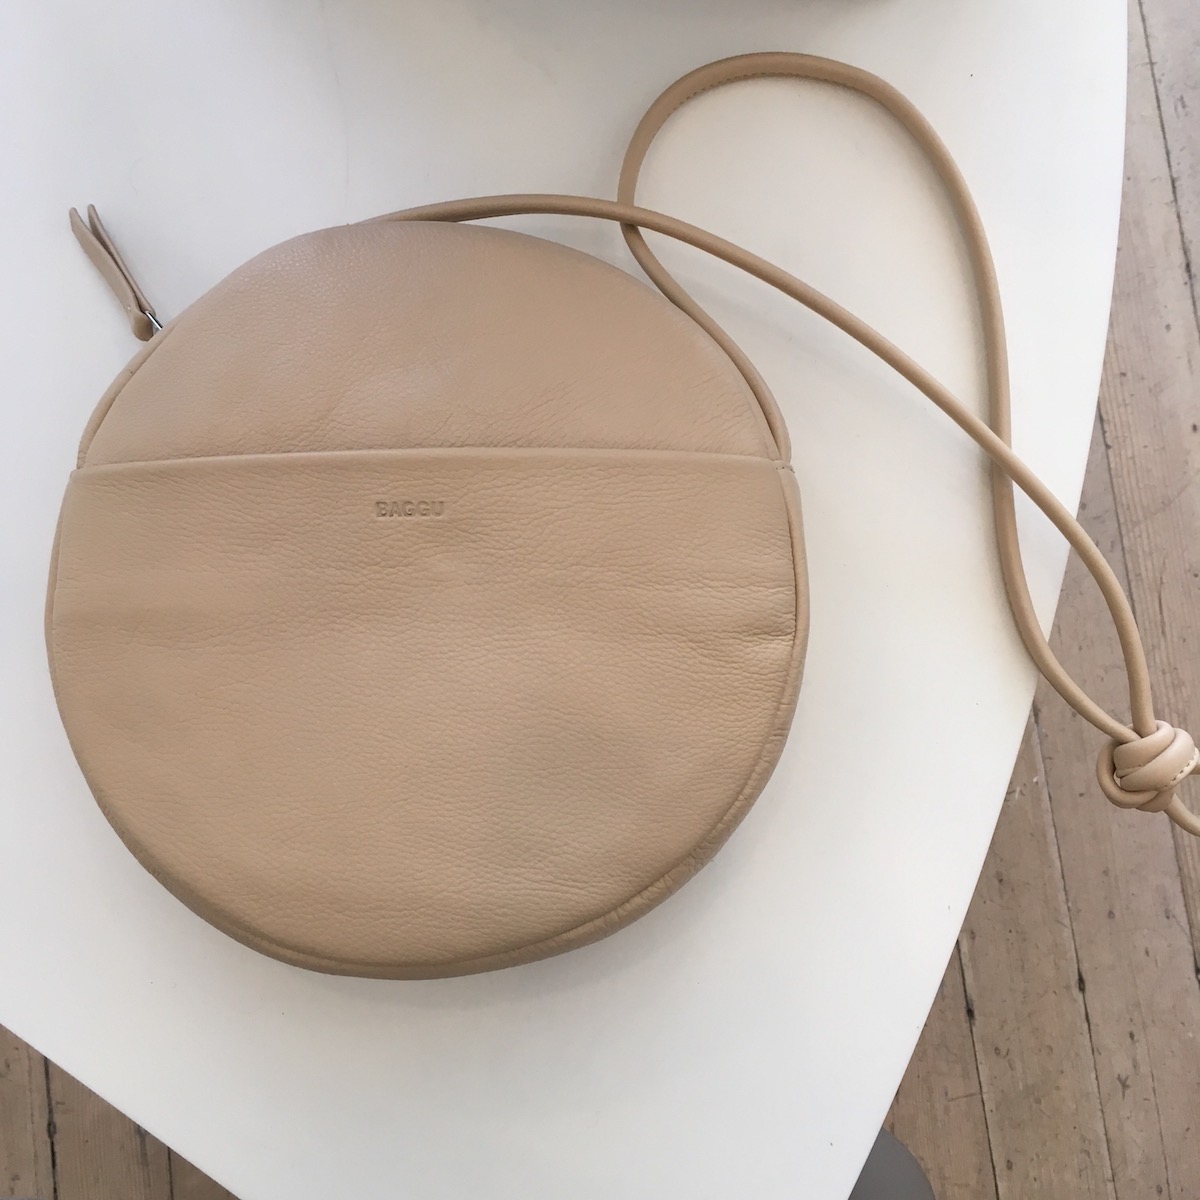 A Baggu Circle Purse in a light brown color on a table at the Baggu store.